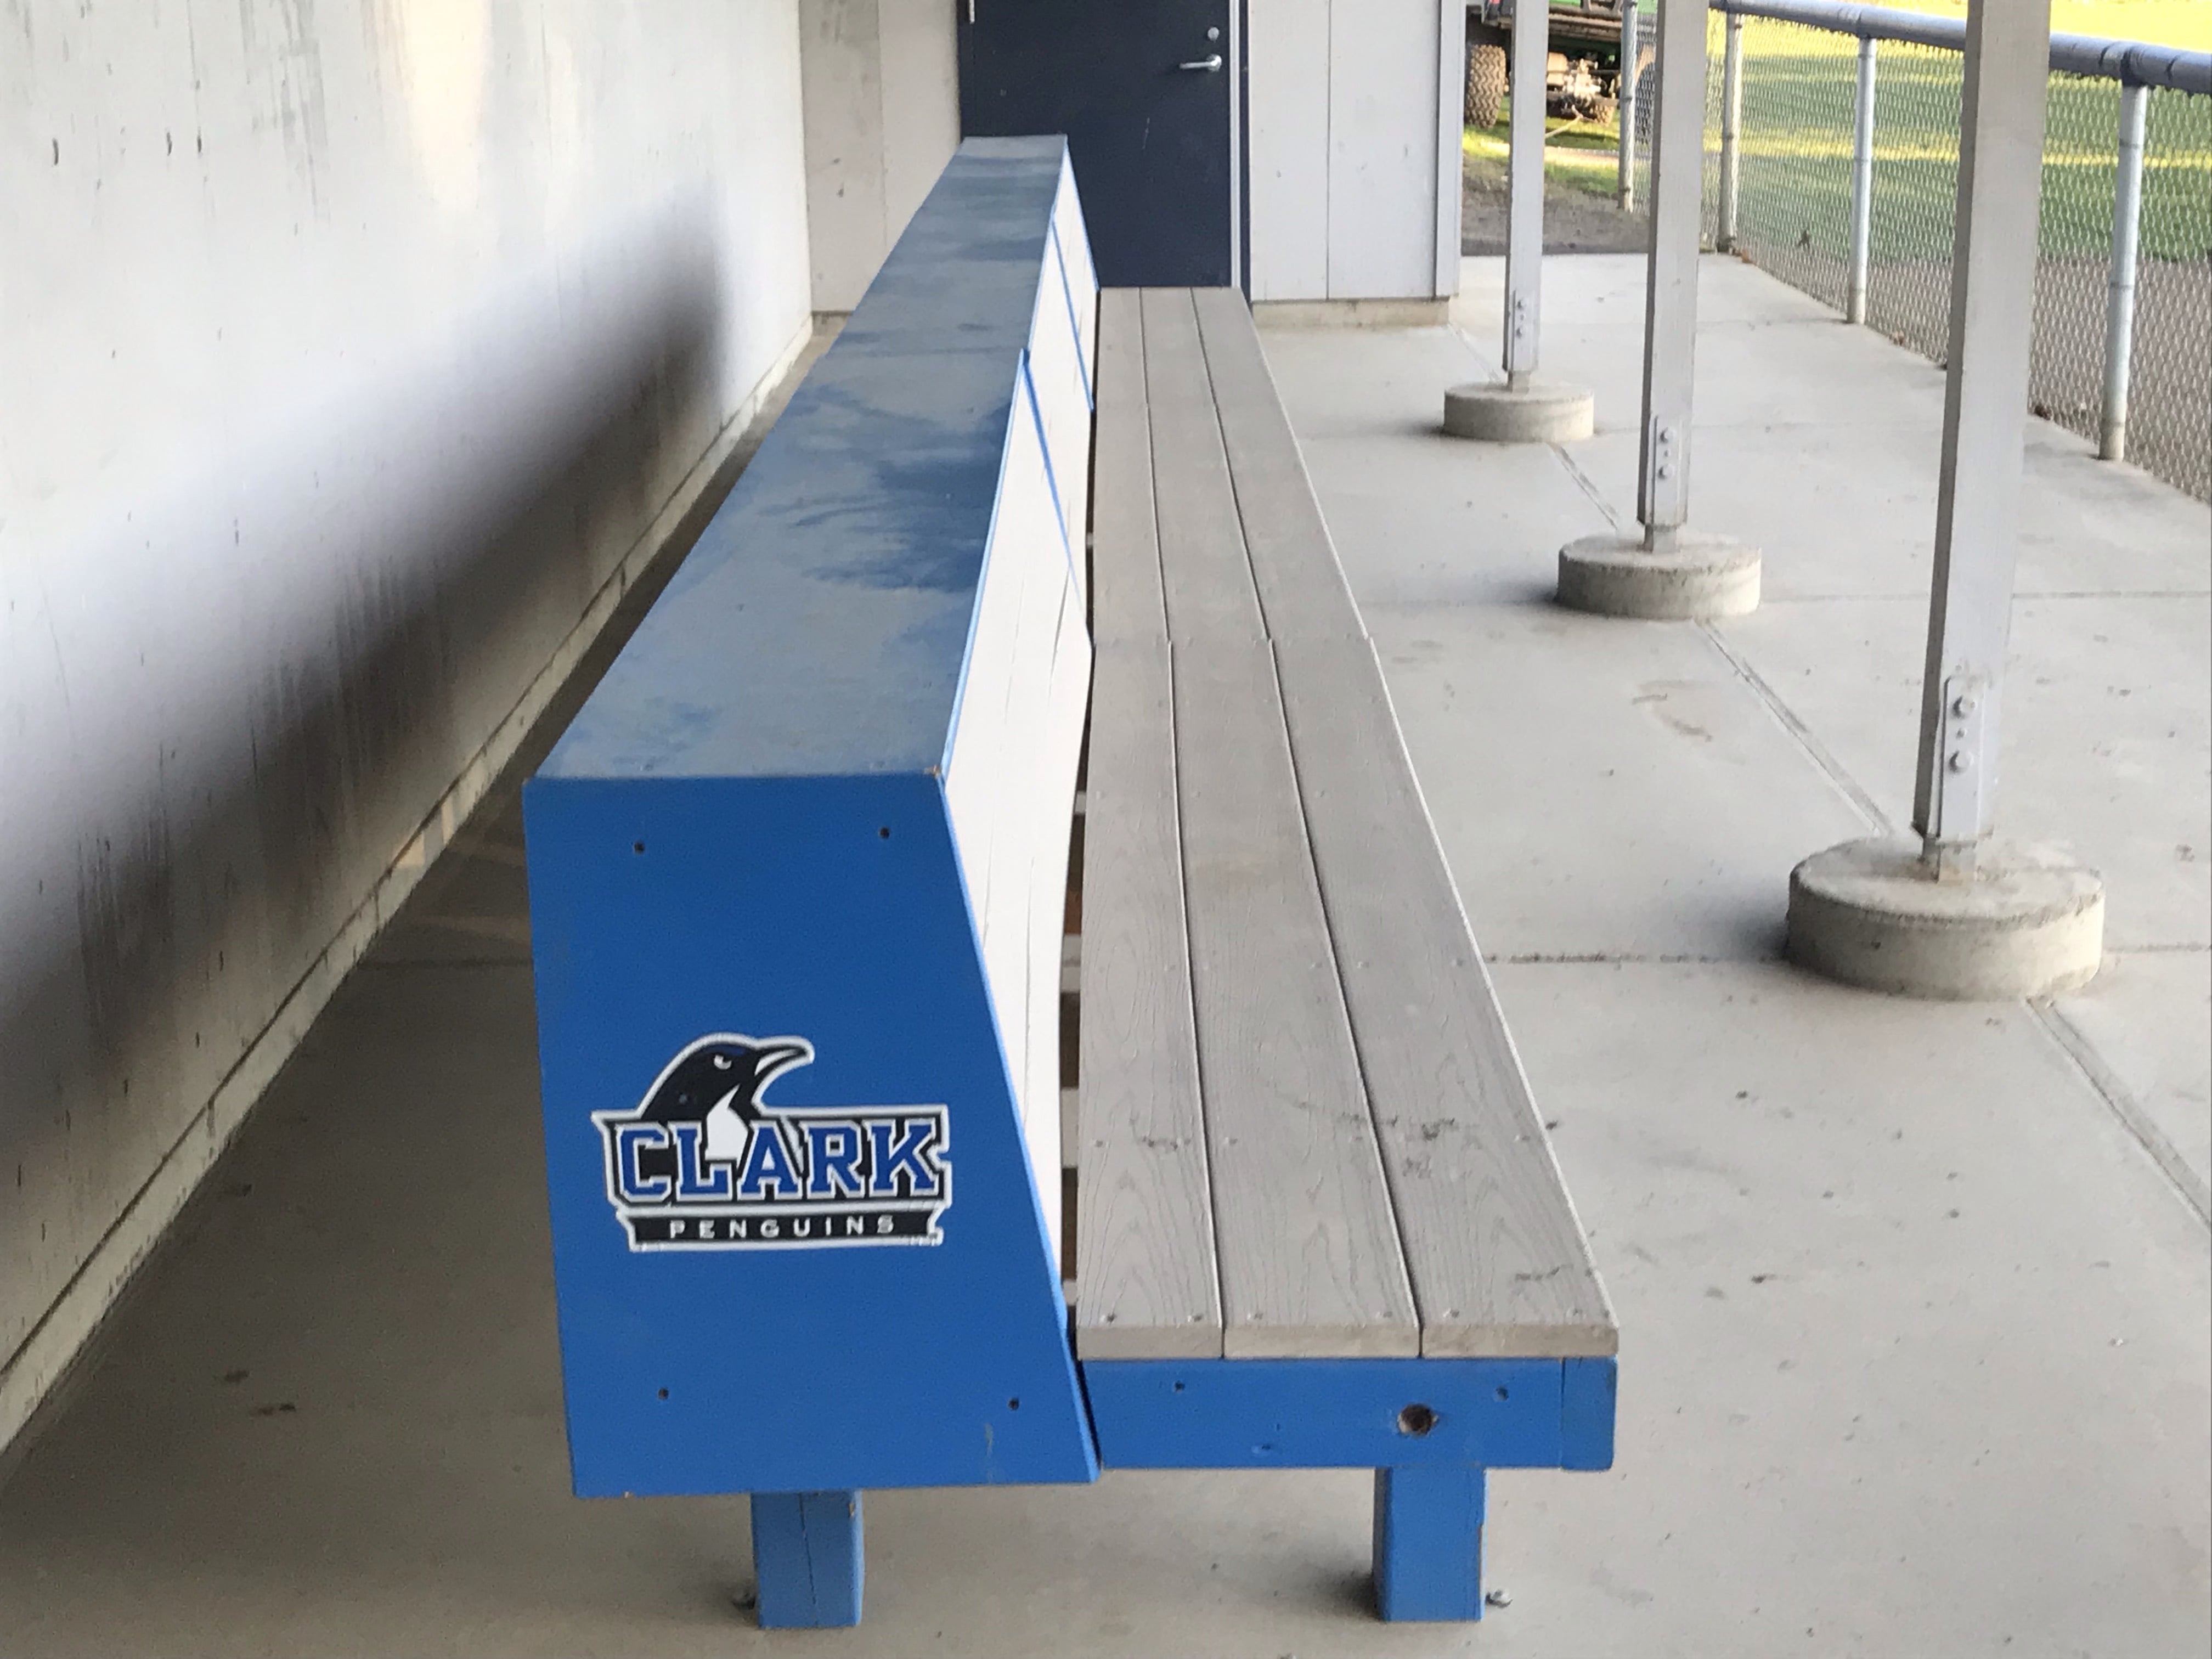 For a second straight season, the Clark College softball dugouts will be empty after the school decided not to have spring sports due to COVID-19.